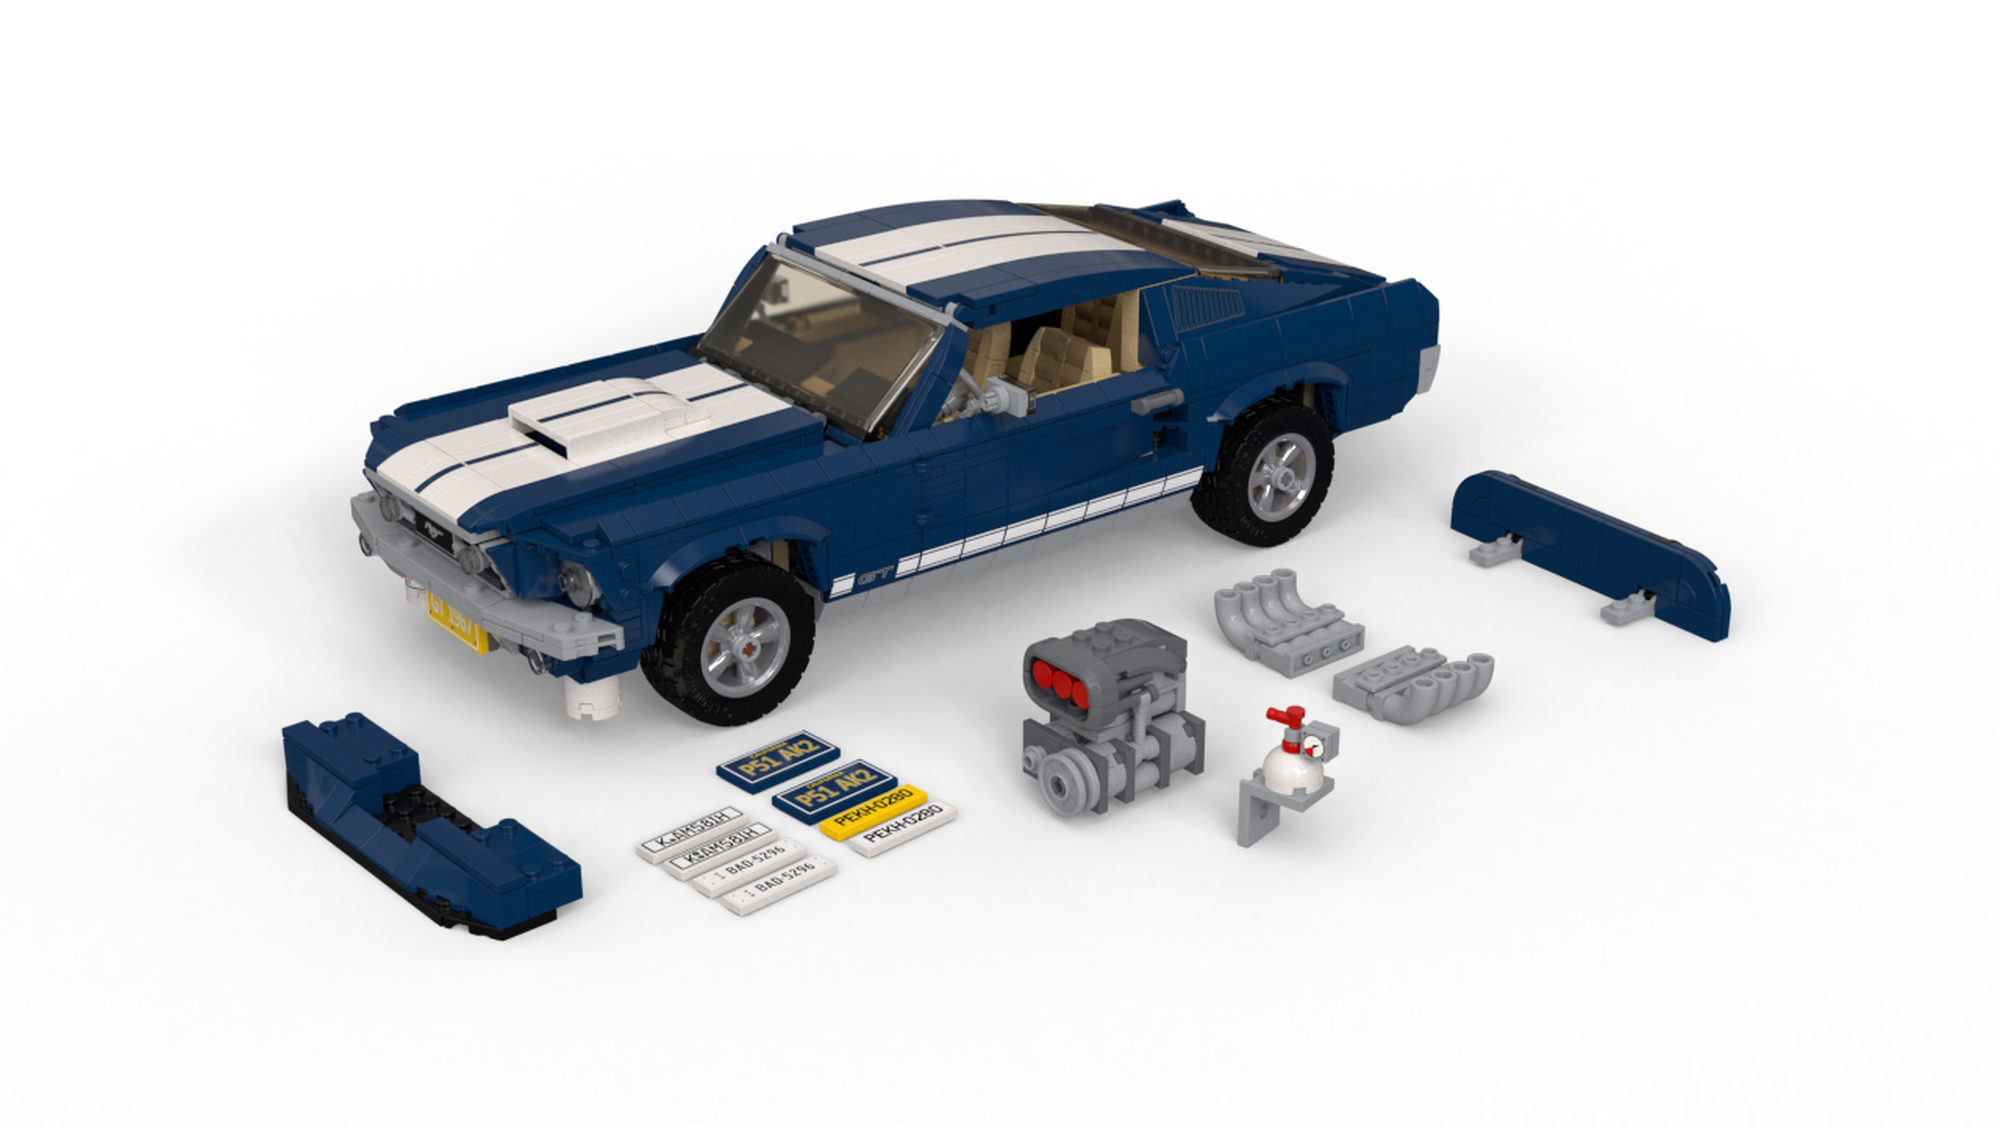 LEGO® Ford Mustang (10265)